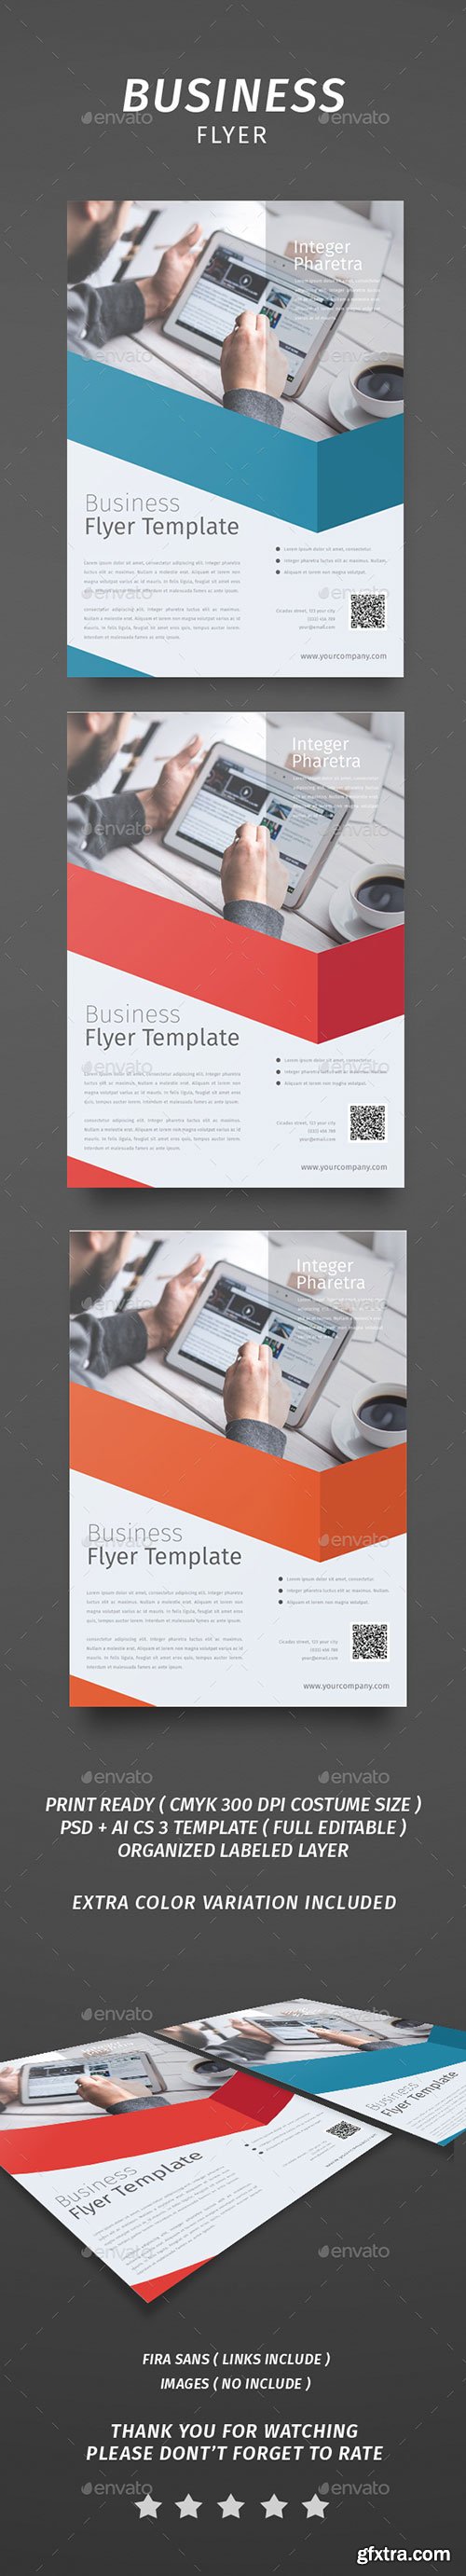 Graphicriver - Business Flyer 14365430